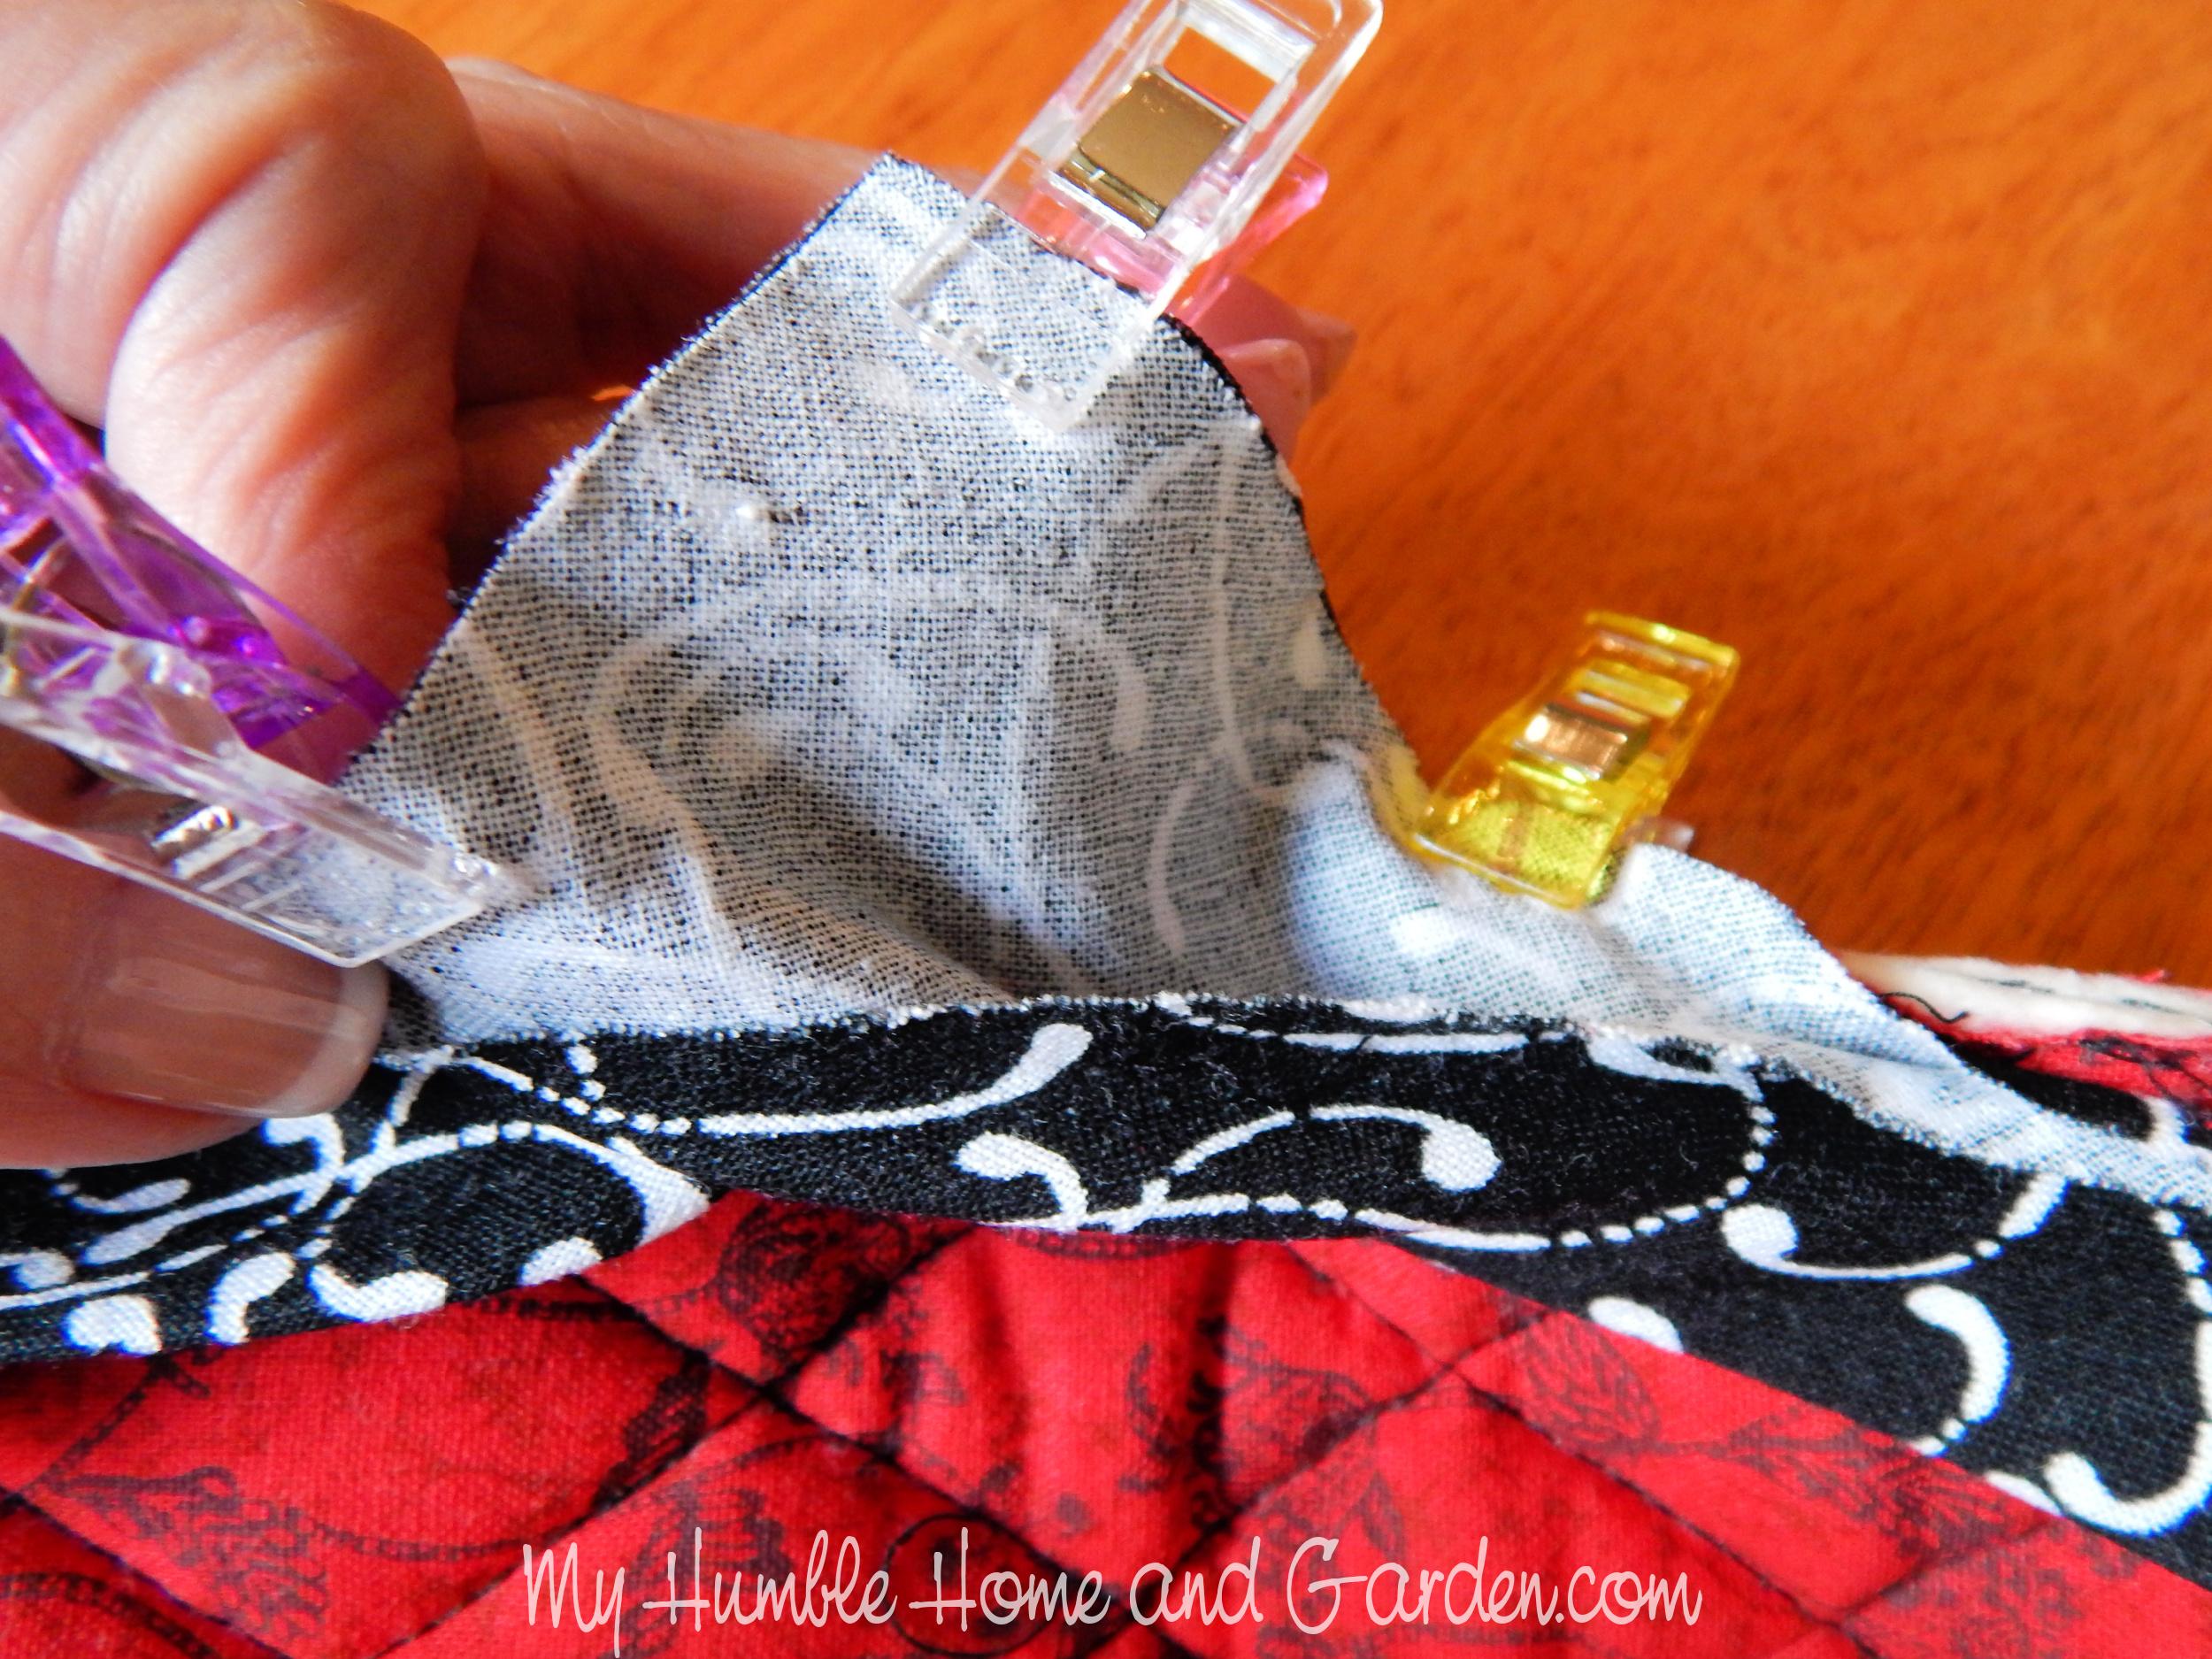 How to Make Heat-Resistant Mini Oven Mitts - My Humble Home and Garden